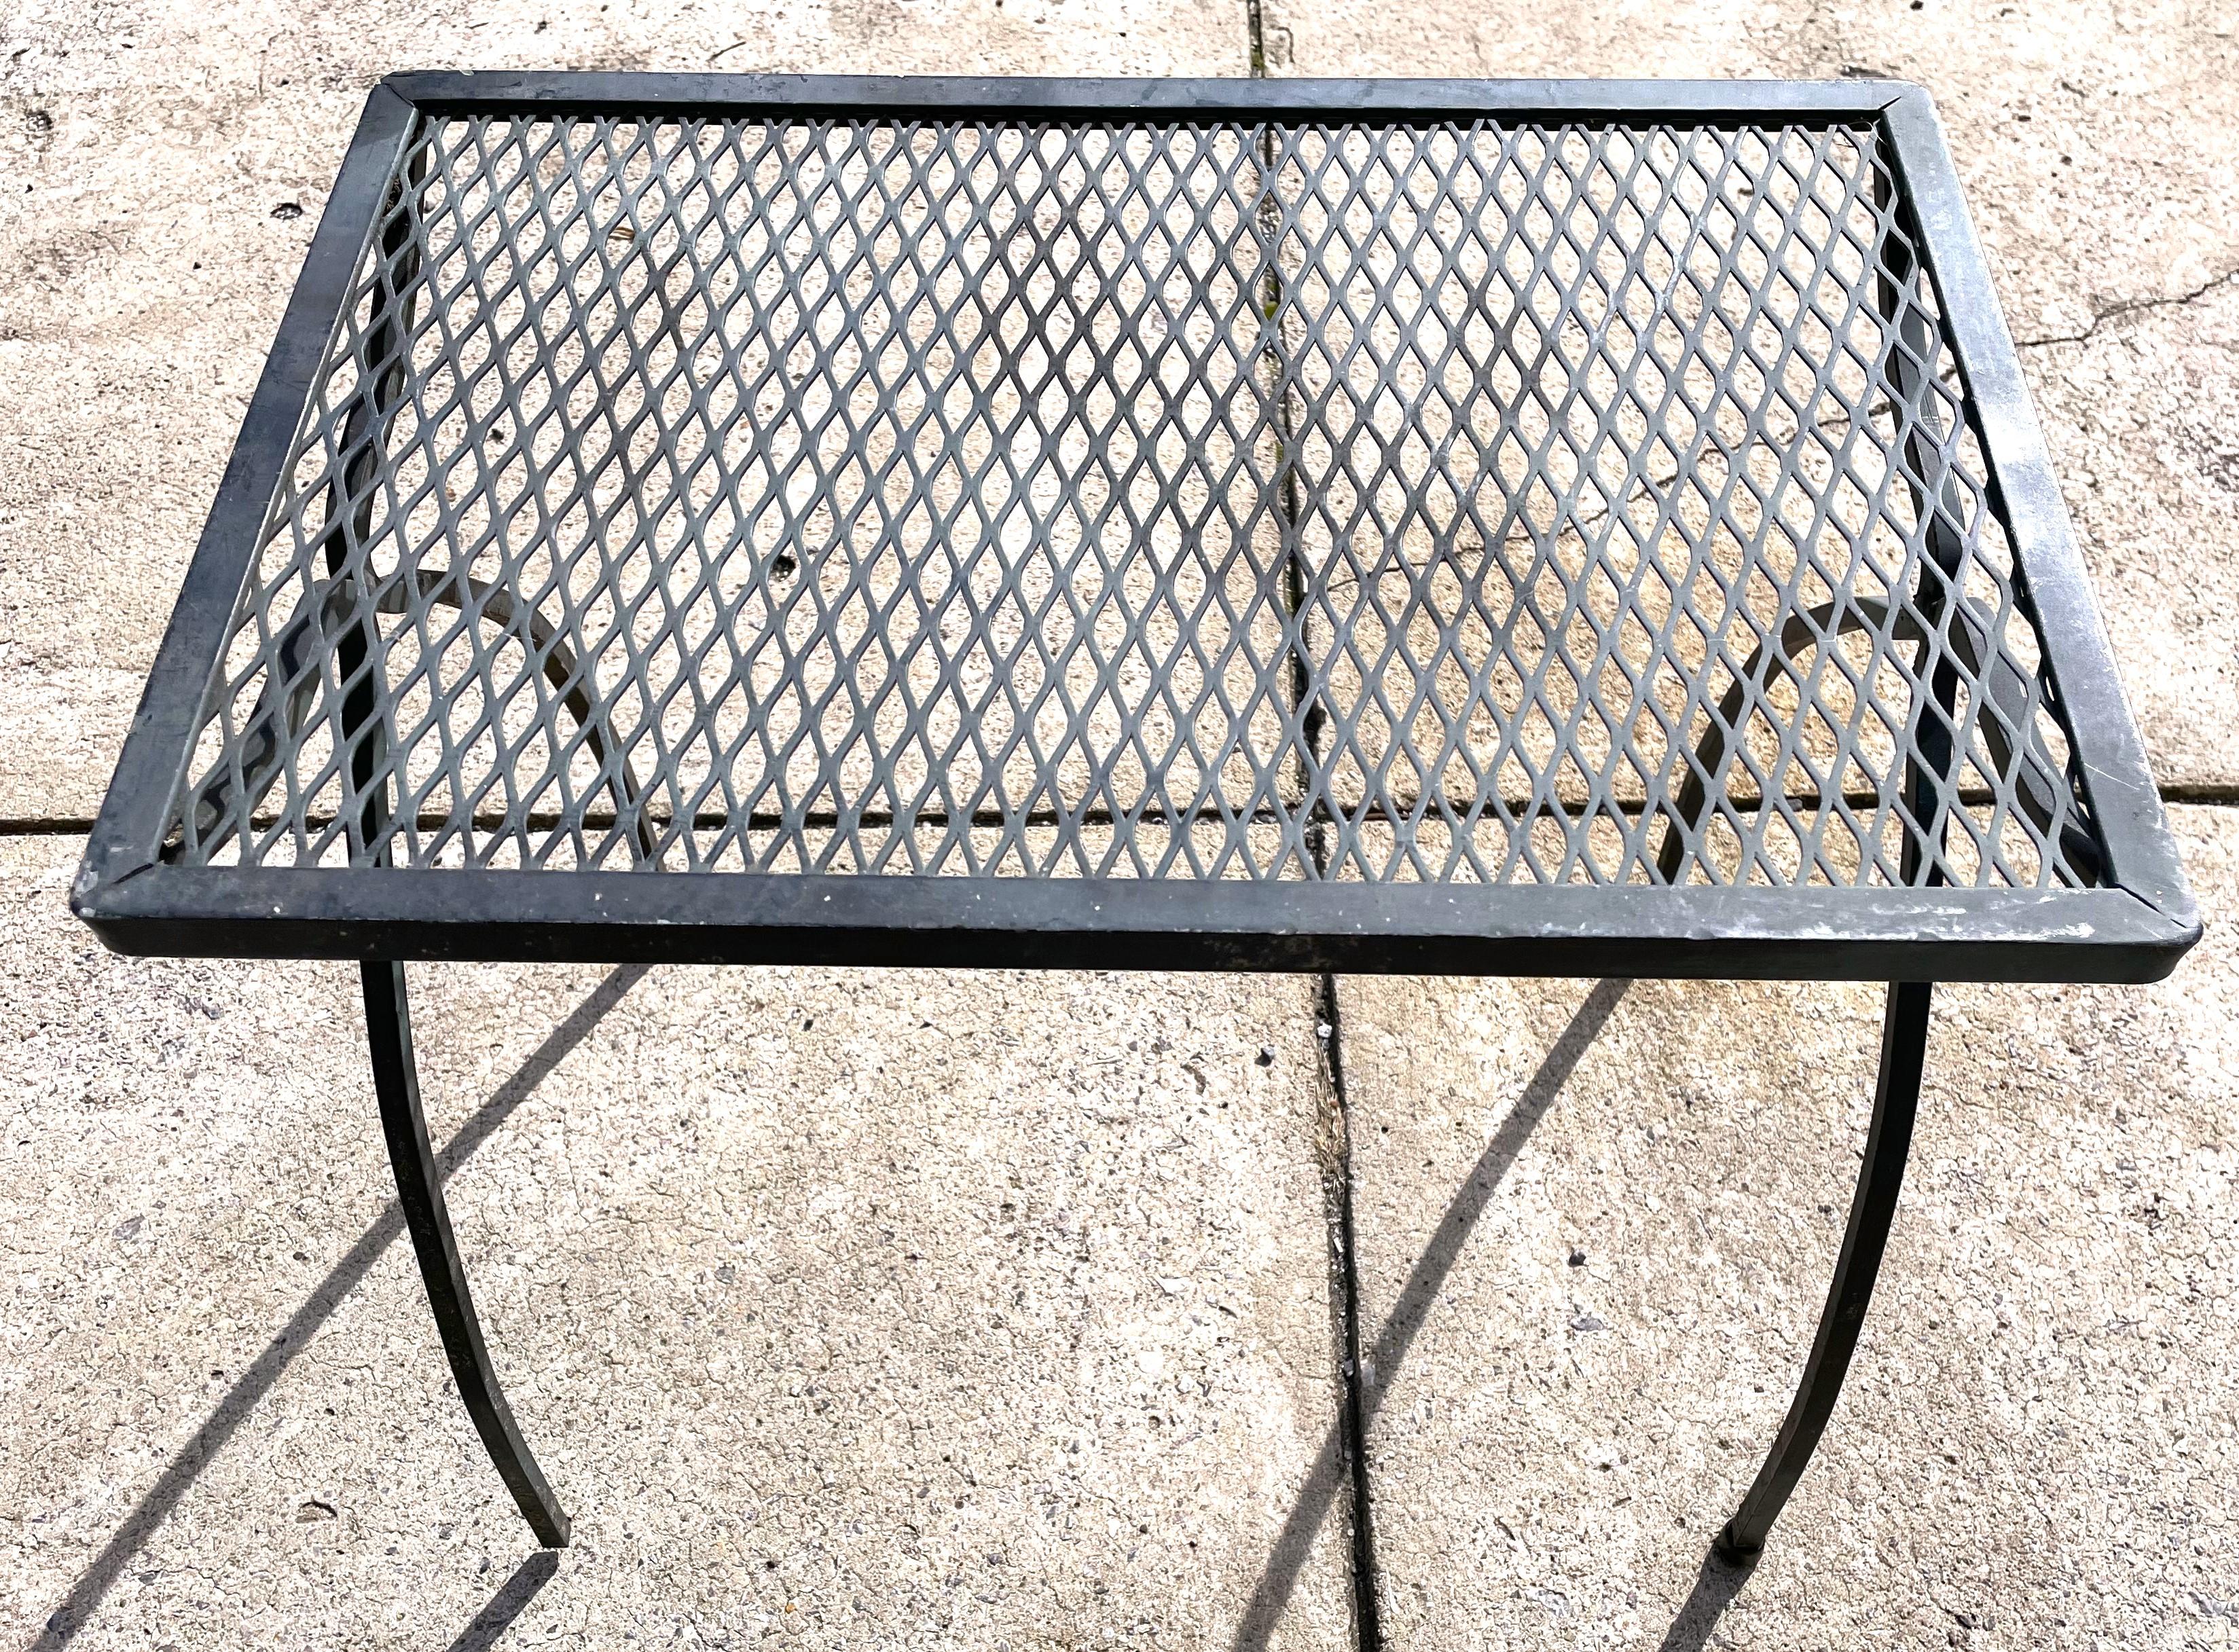 This is a great looking and very useable small side table by itself, but I think it was originally part of a stacking set. The table is 18 3/8 inches wide, 12 3/8 inches deep and 17 inches tall and is a wonderful steel gray black that looks like it